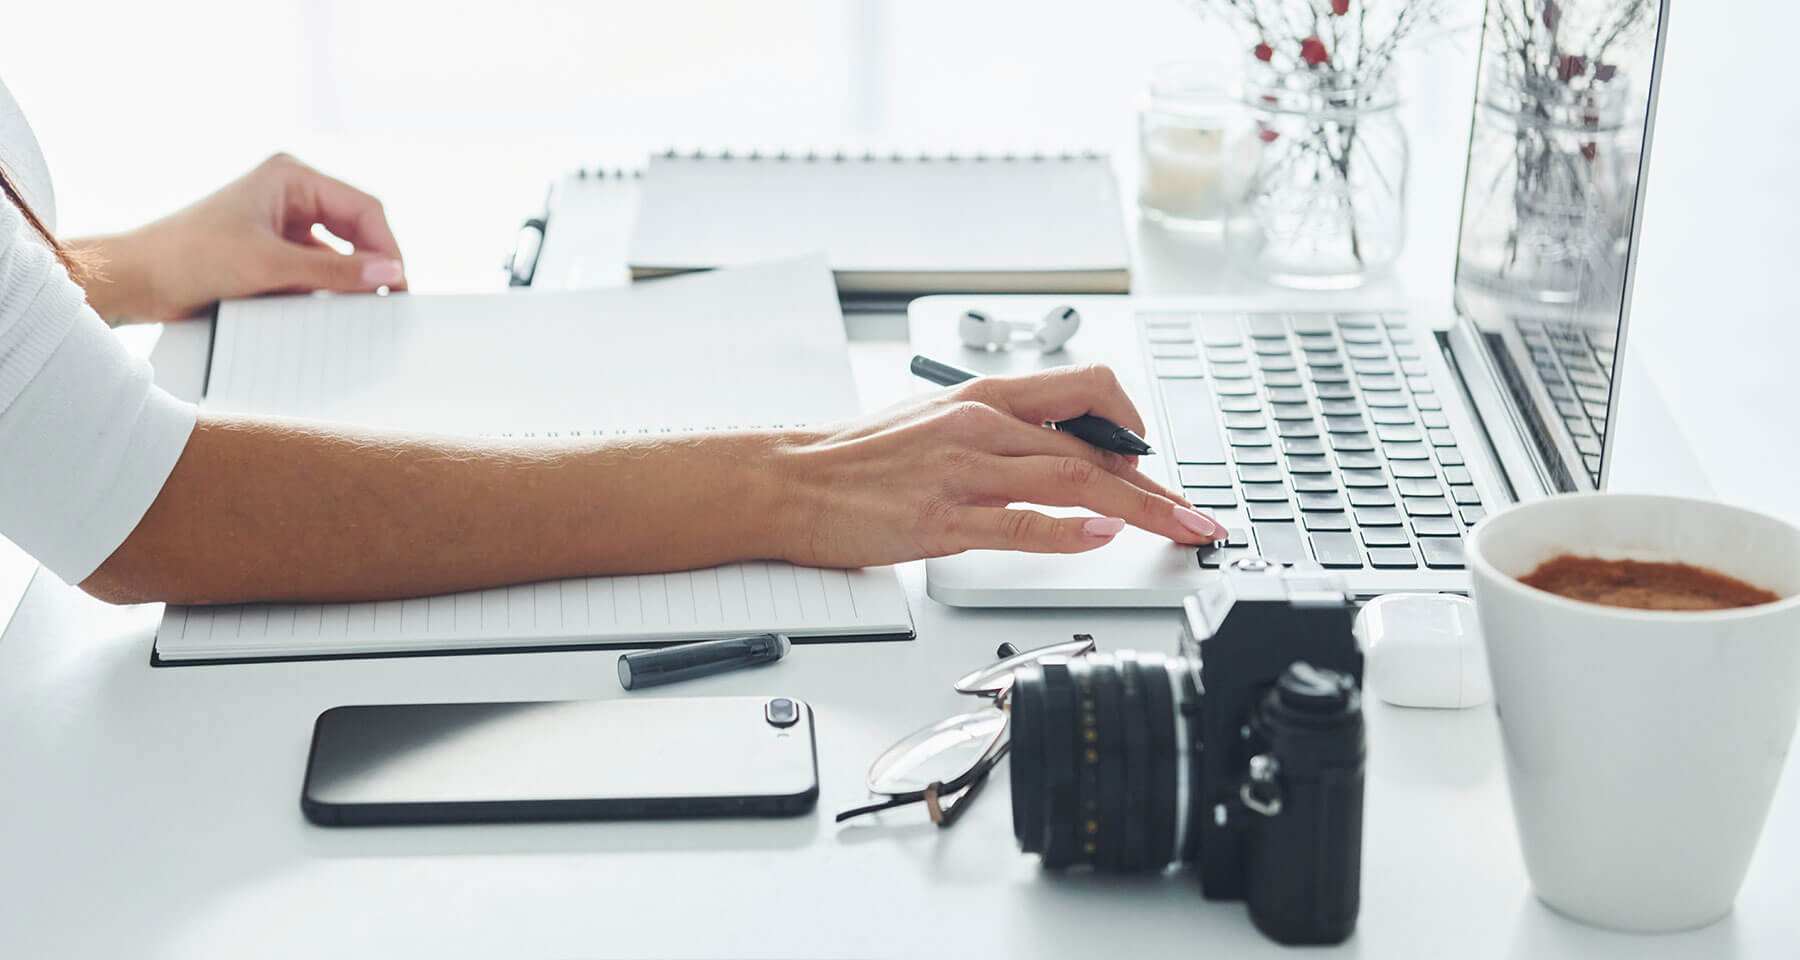 Woman working on content on laptop with camera notepad and iphone on desk